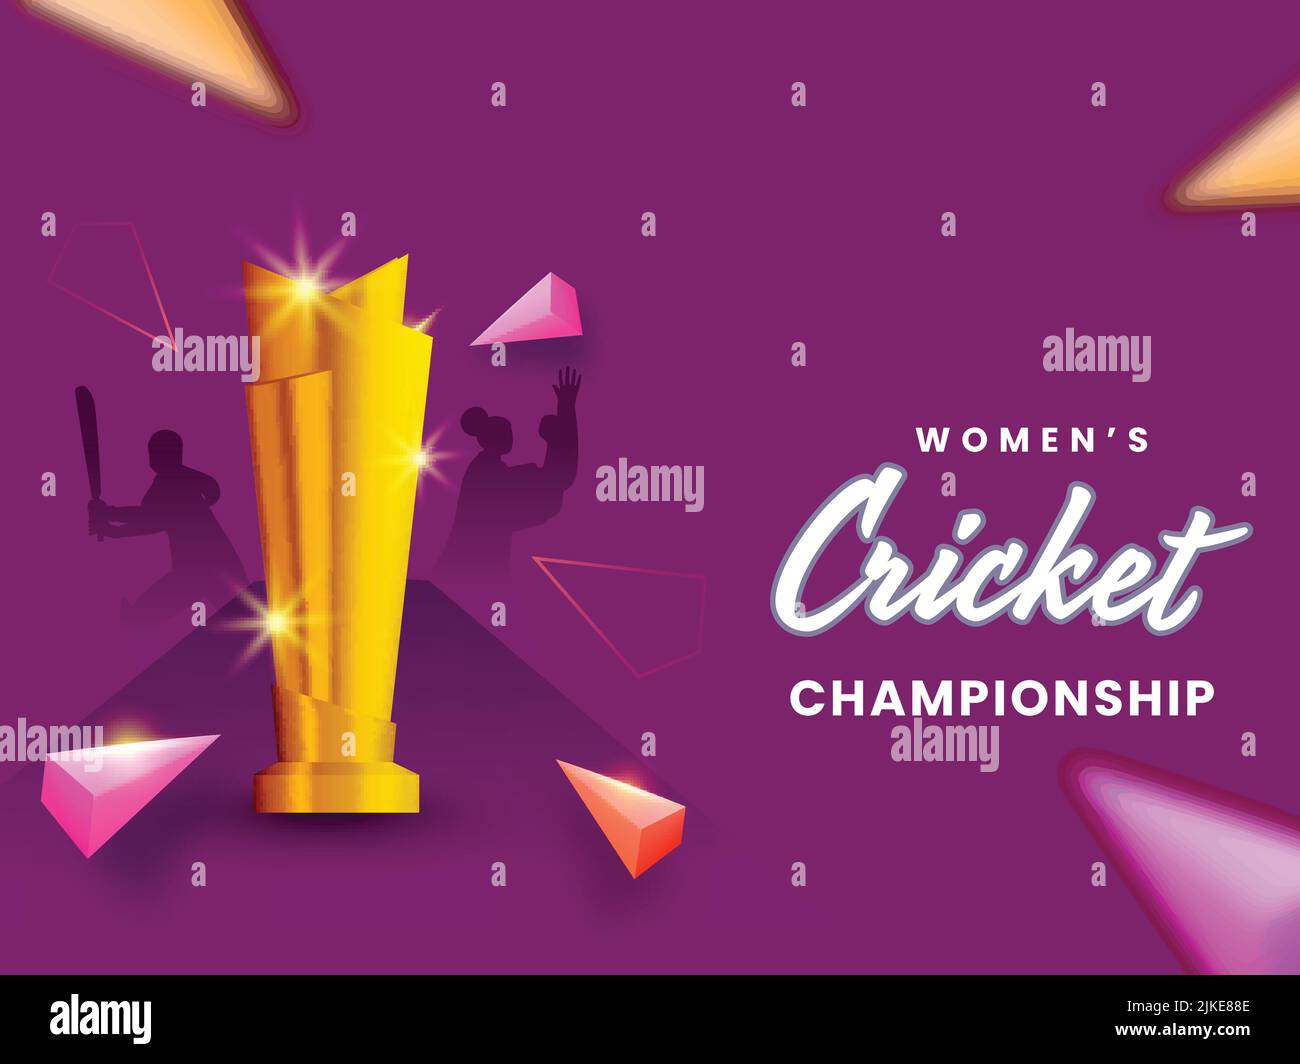 Women's Cricket Champinship Concept With Shiny Golden Winning Trophy Cup, Silhouette Cricketer Players And 3D Triangle Elements On Dark Pink Backgroun Stock Vector